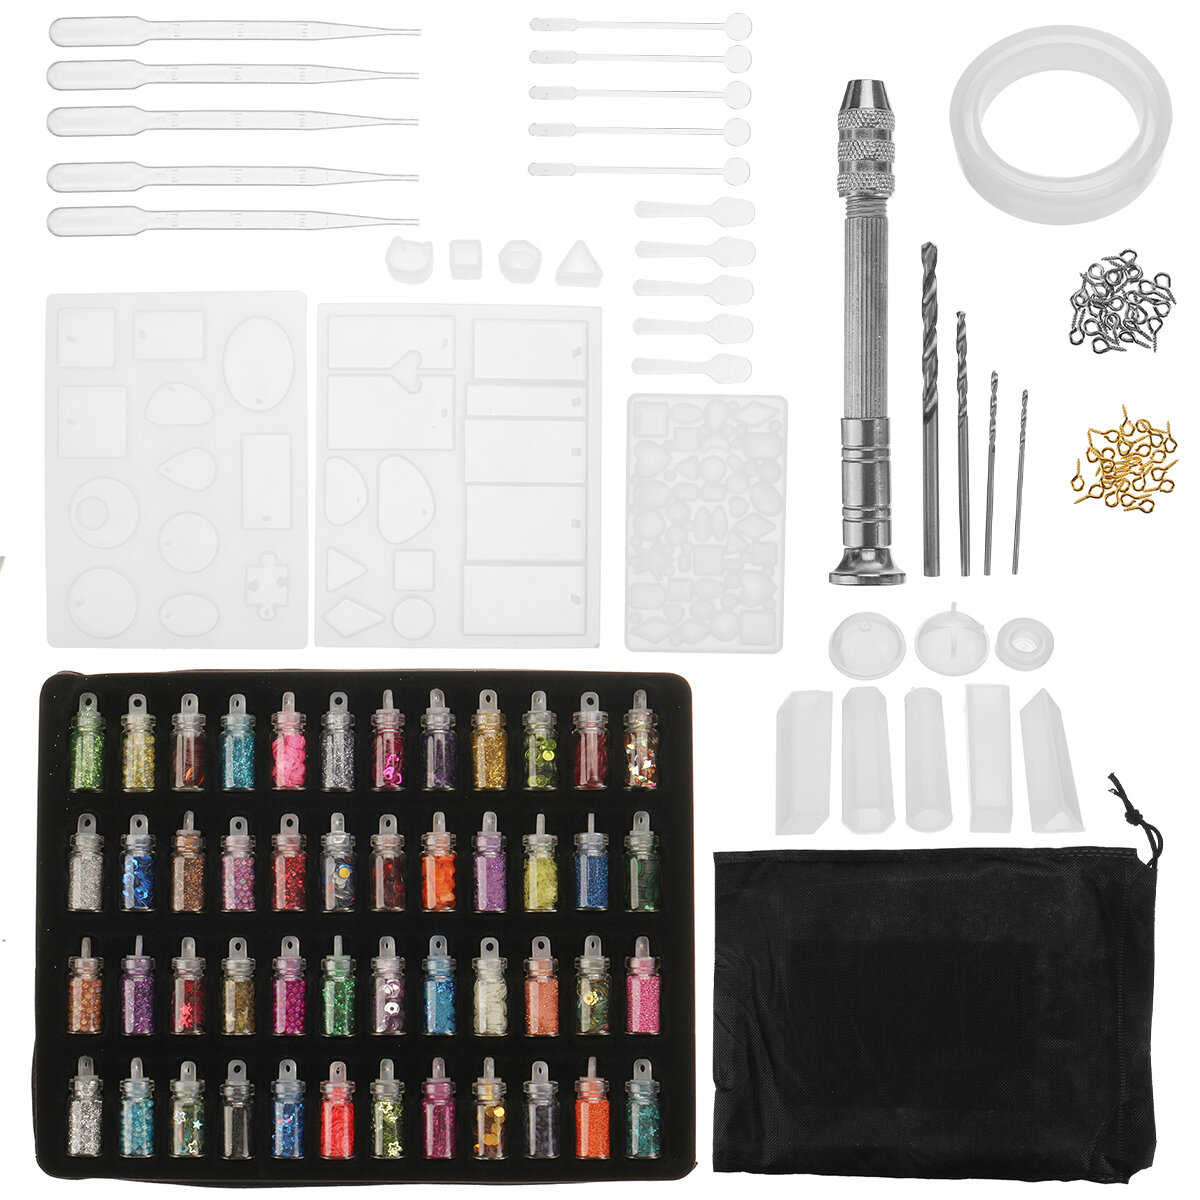 

184Pcs Epoxy Casting Molds Set Silicone UV Casting Tools kits Resin Casting Molds for Jewelry making DIY Earring